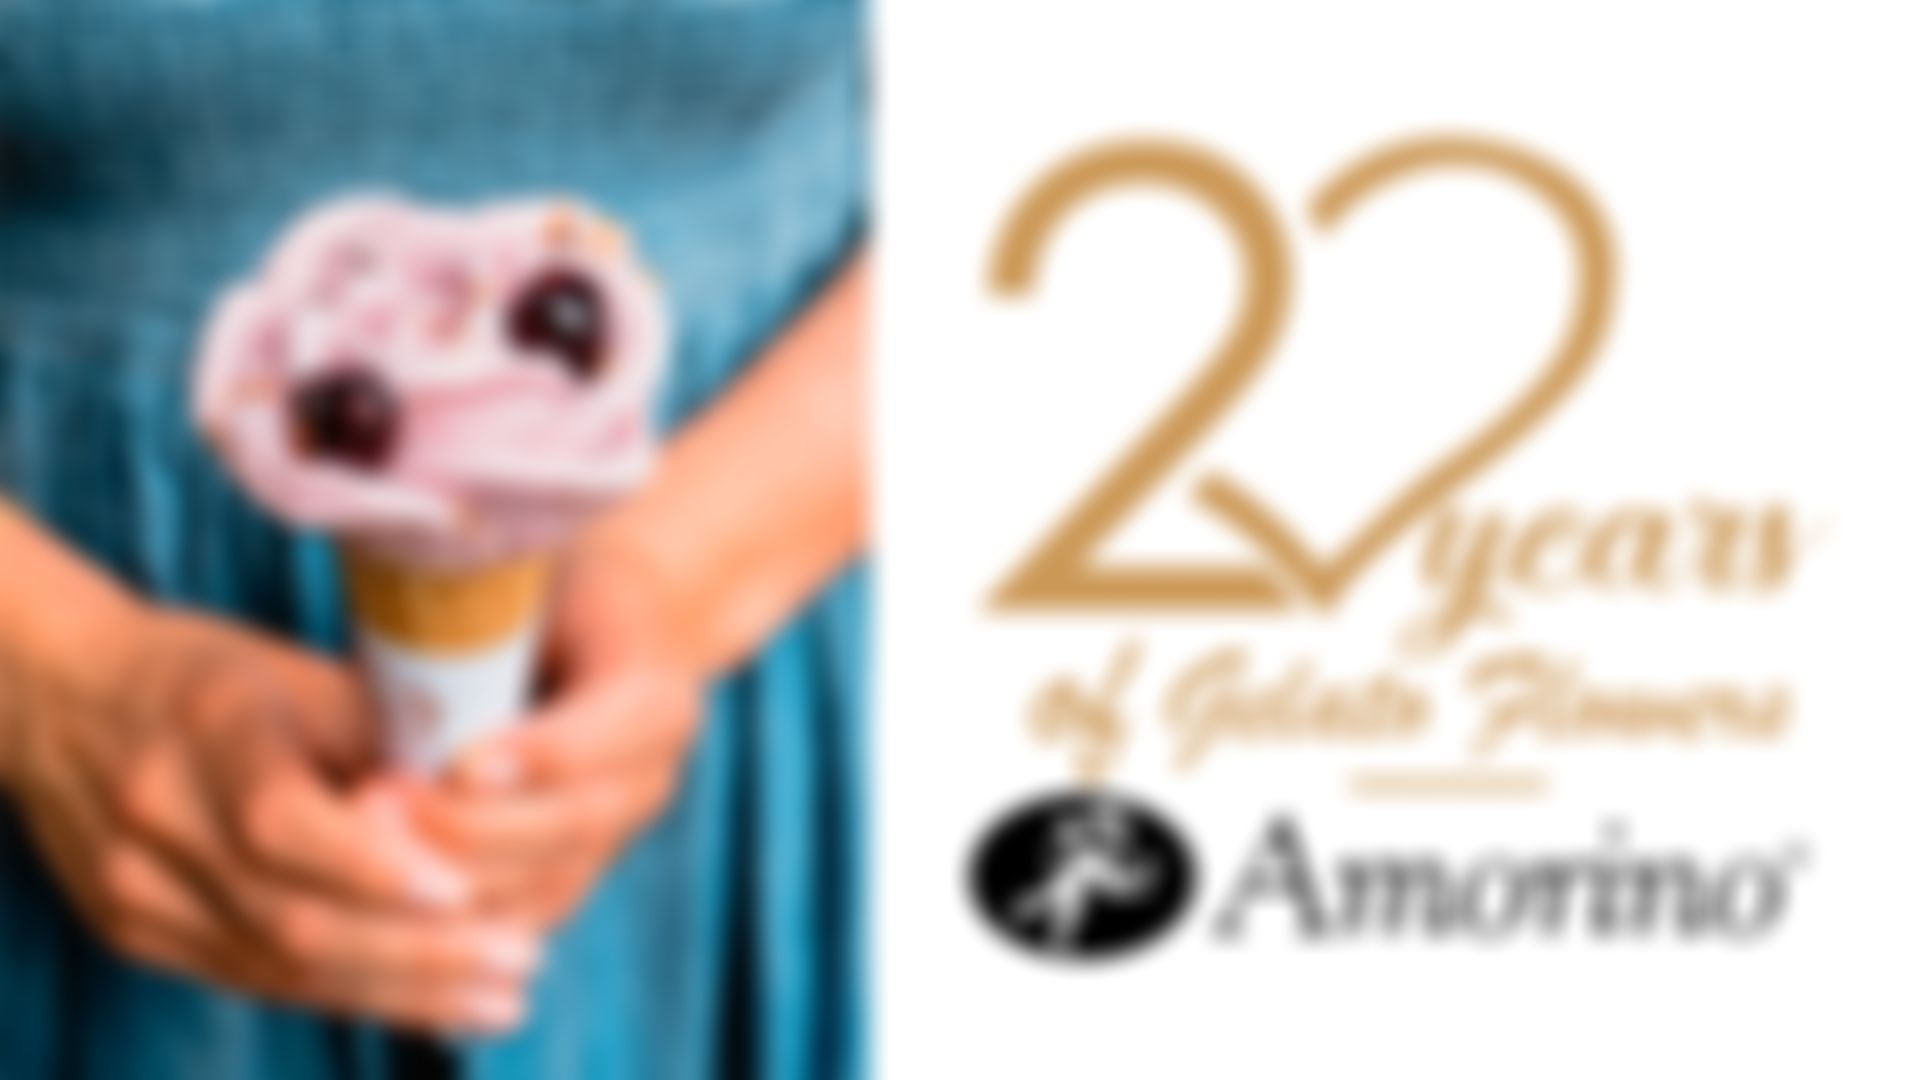 TRAVEL TO ITALY WITH AMORINO, THE ITALIAN GELATO PARLOUR IS CELEBRATING ITS 20TH ANNIVERSARY